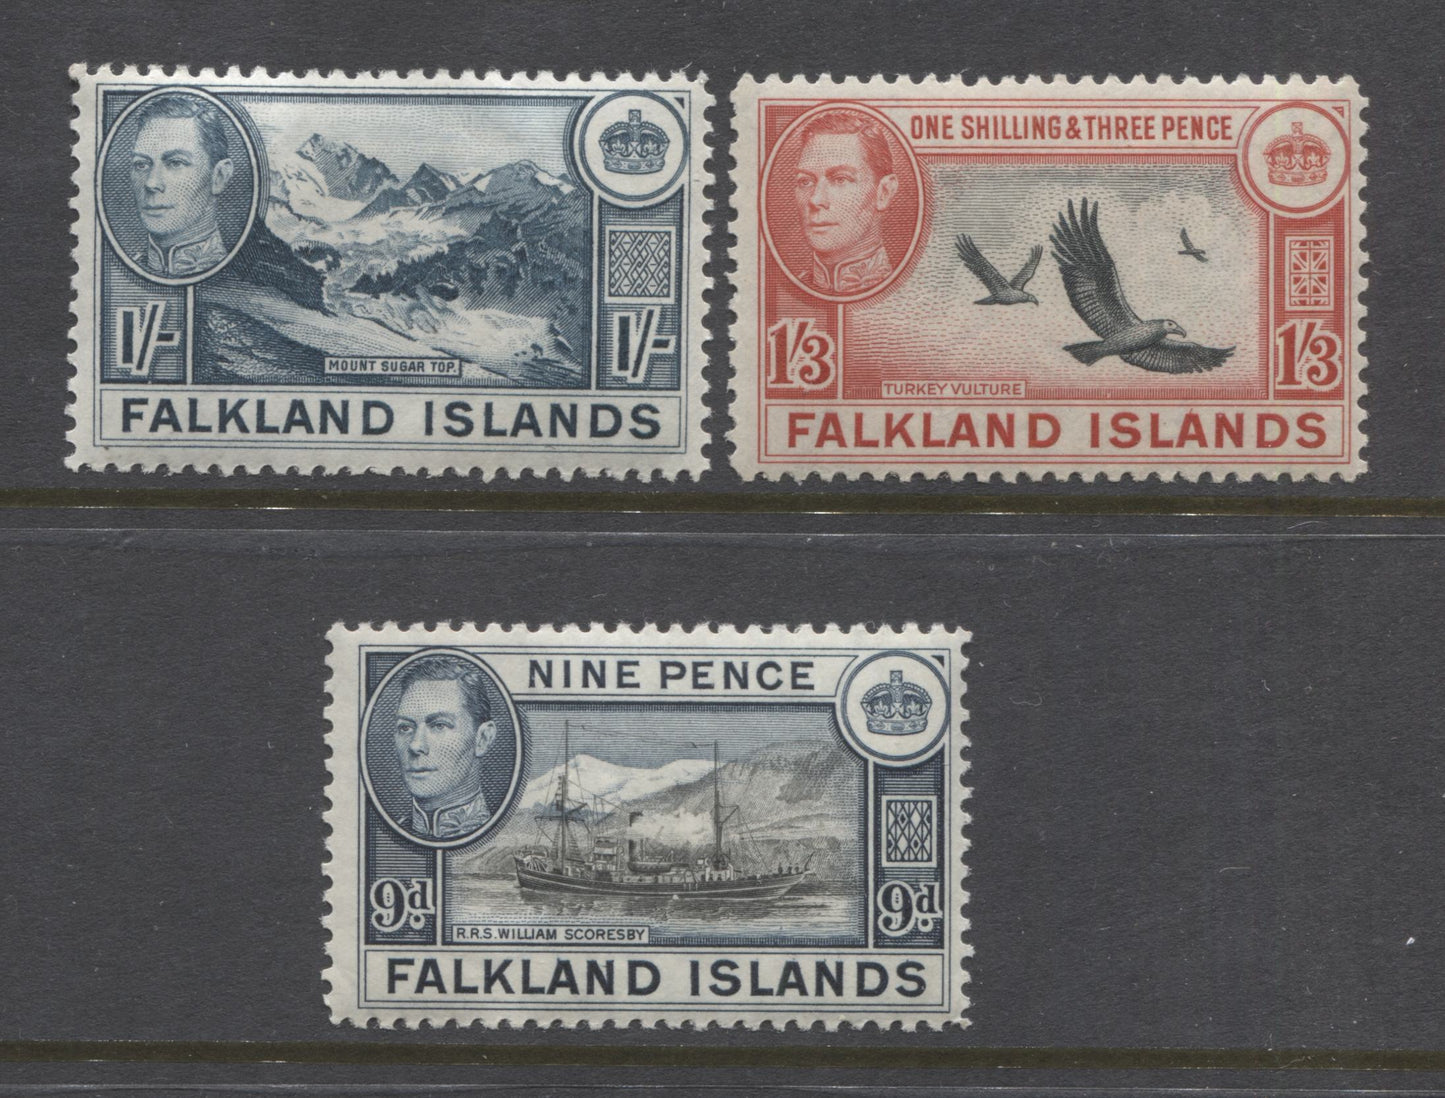 Lot 69 Falkland Islands SG#157-159 1938-1950 Bradbury Wilkinsion Pictorial Definitive Issue, a Fine NH Partial Set From 9d to 1/3d,  Various Printings, SG. Cat 105.50 GBP = $181.46